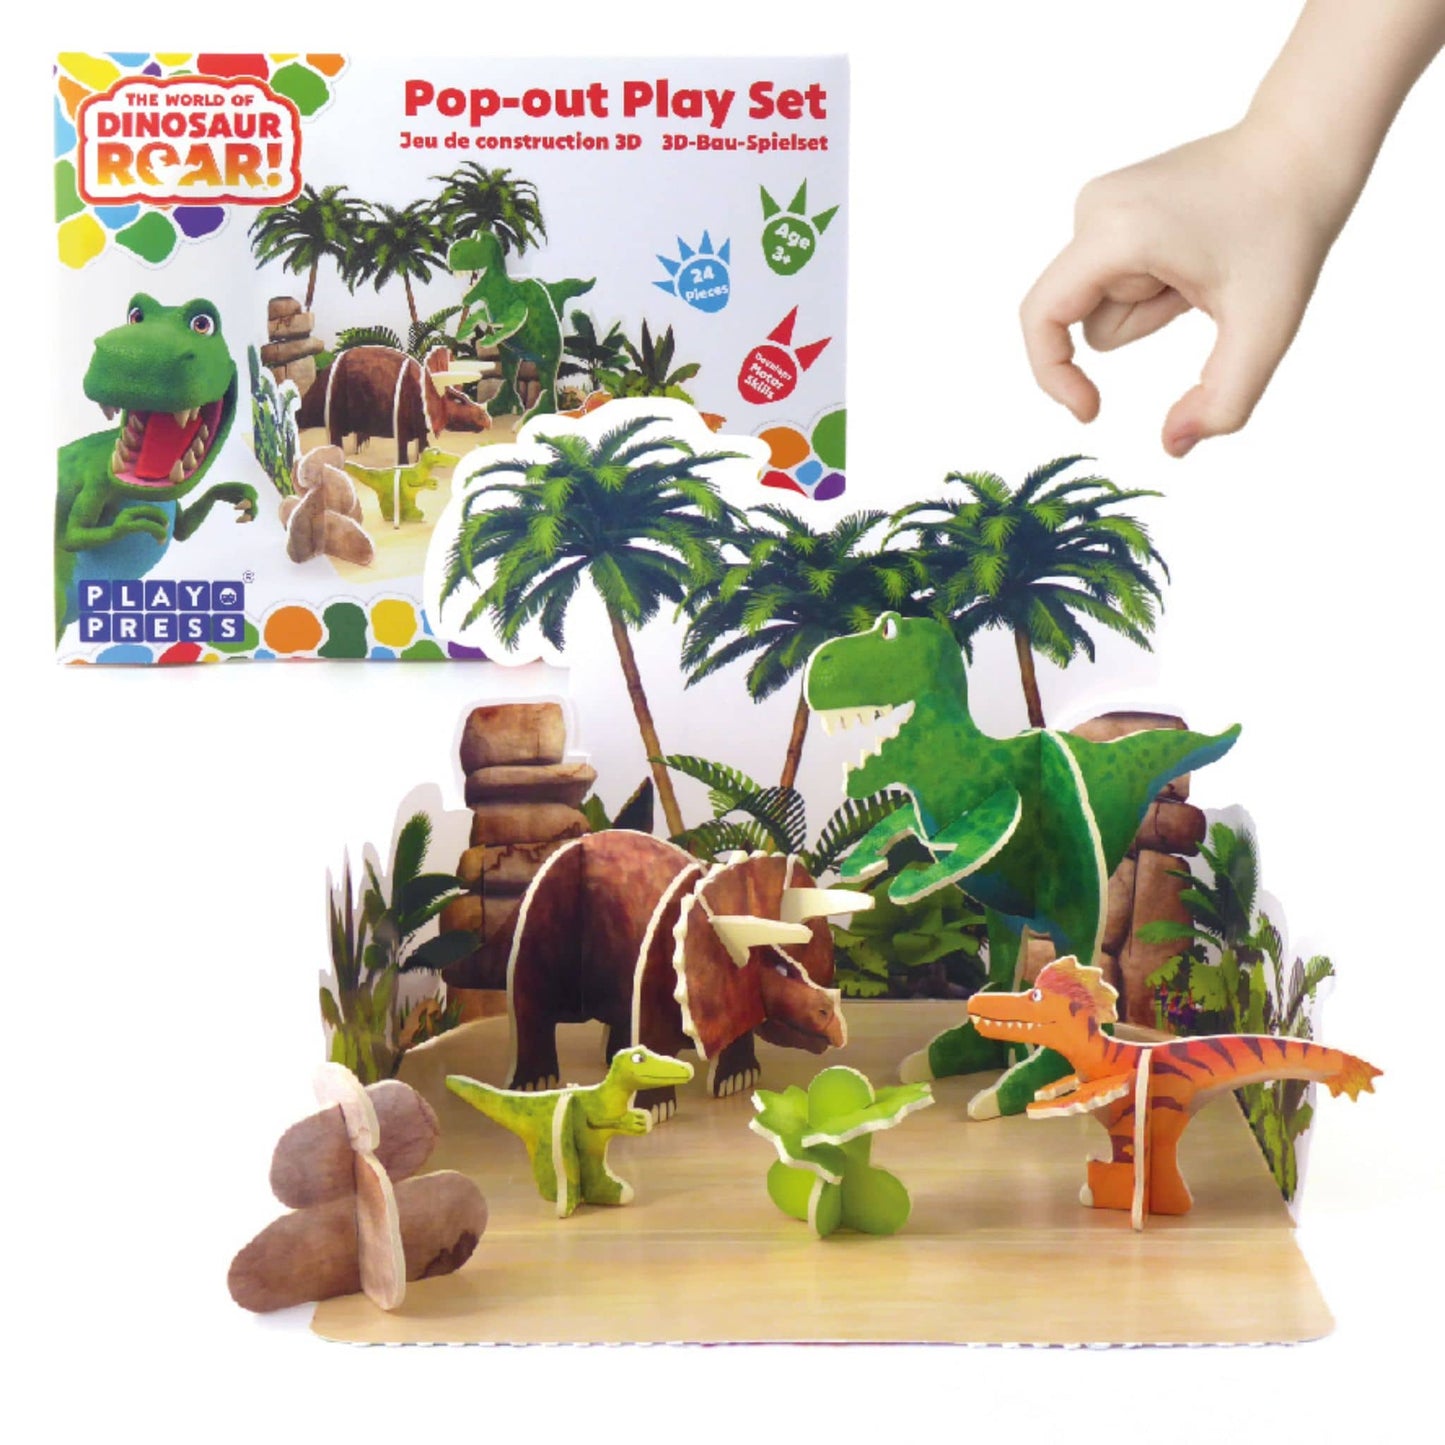 Dinosaur Roar! Pop Out Play Set - play set and packaging with child's hand